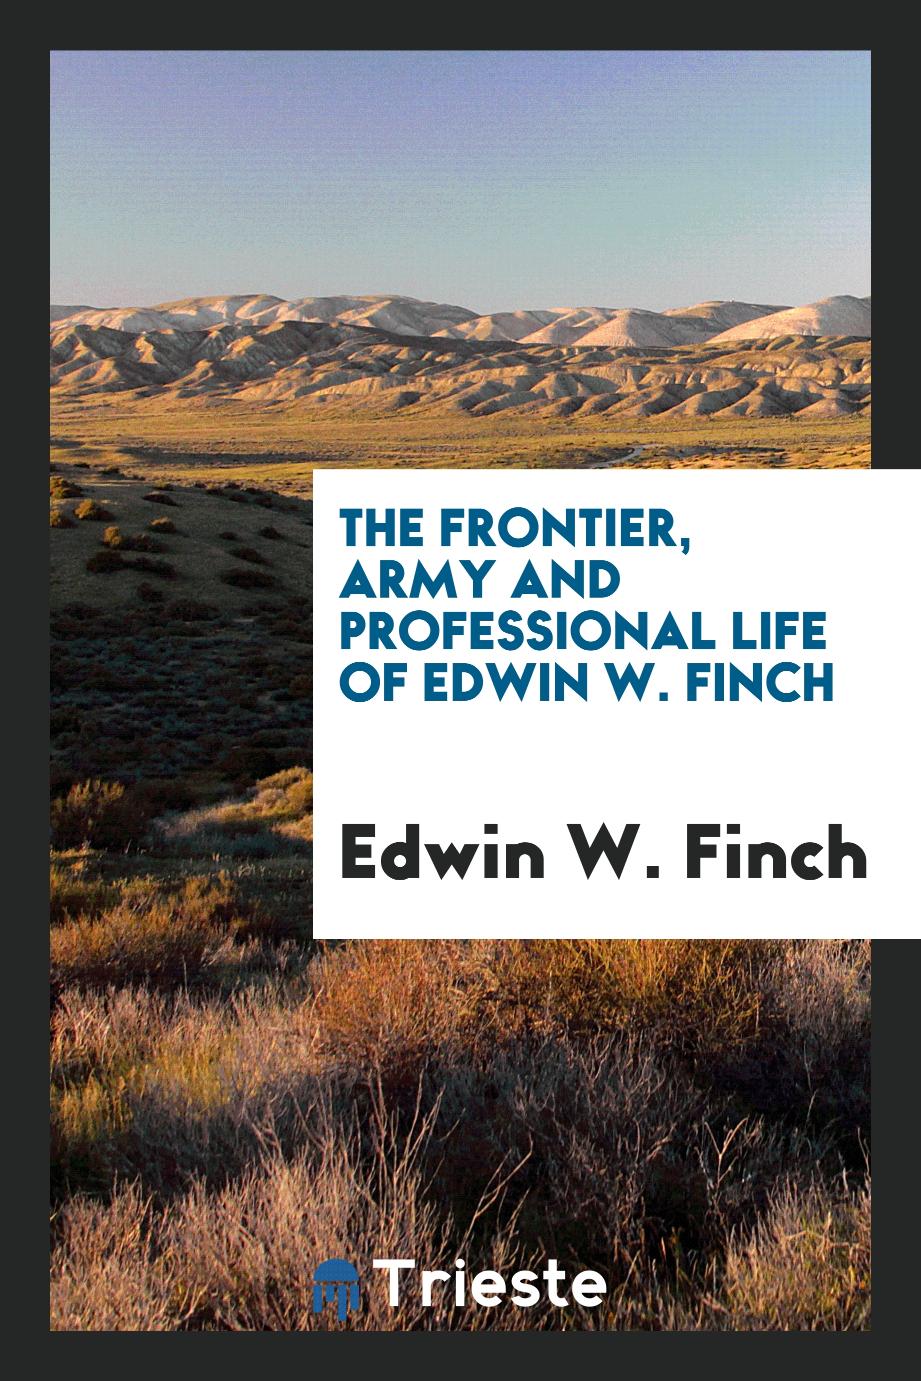 The Frontier, Army and Professional Life of Edwin W. Finch